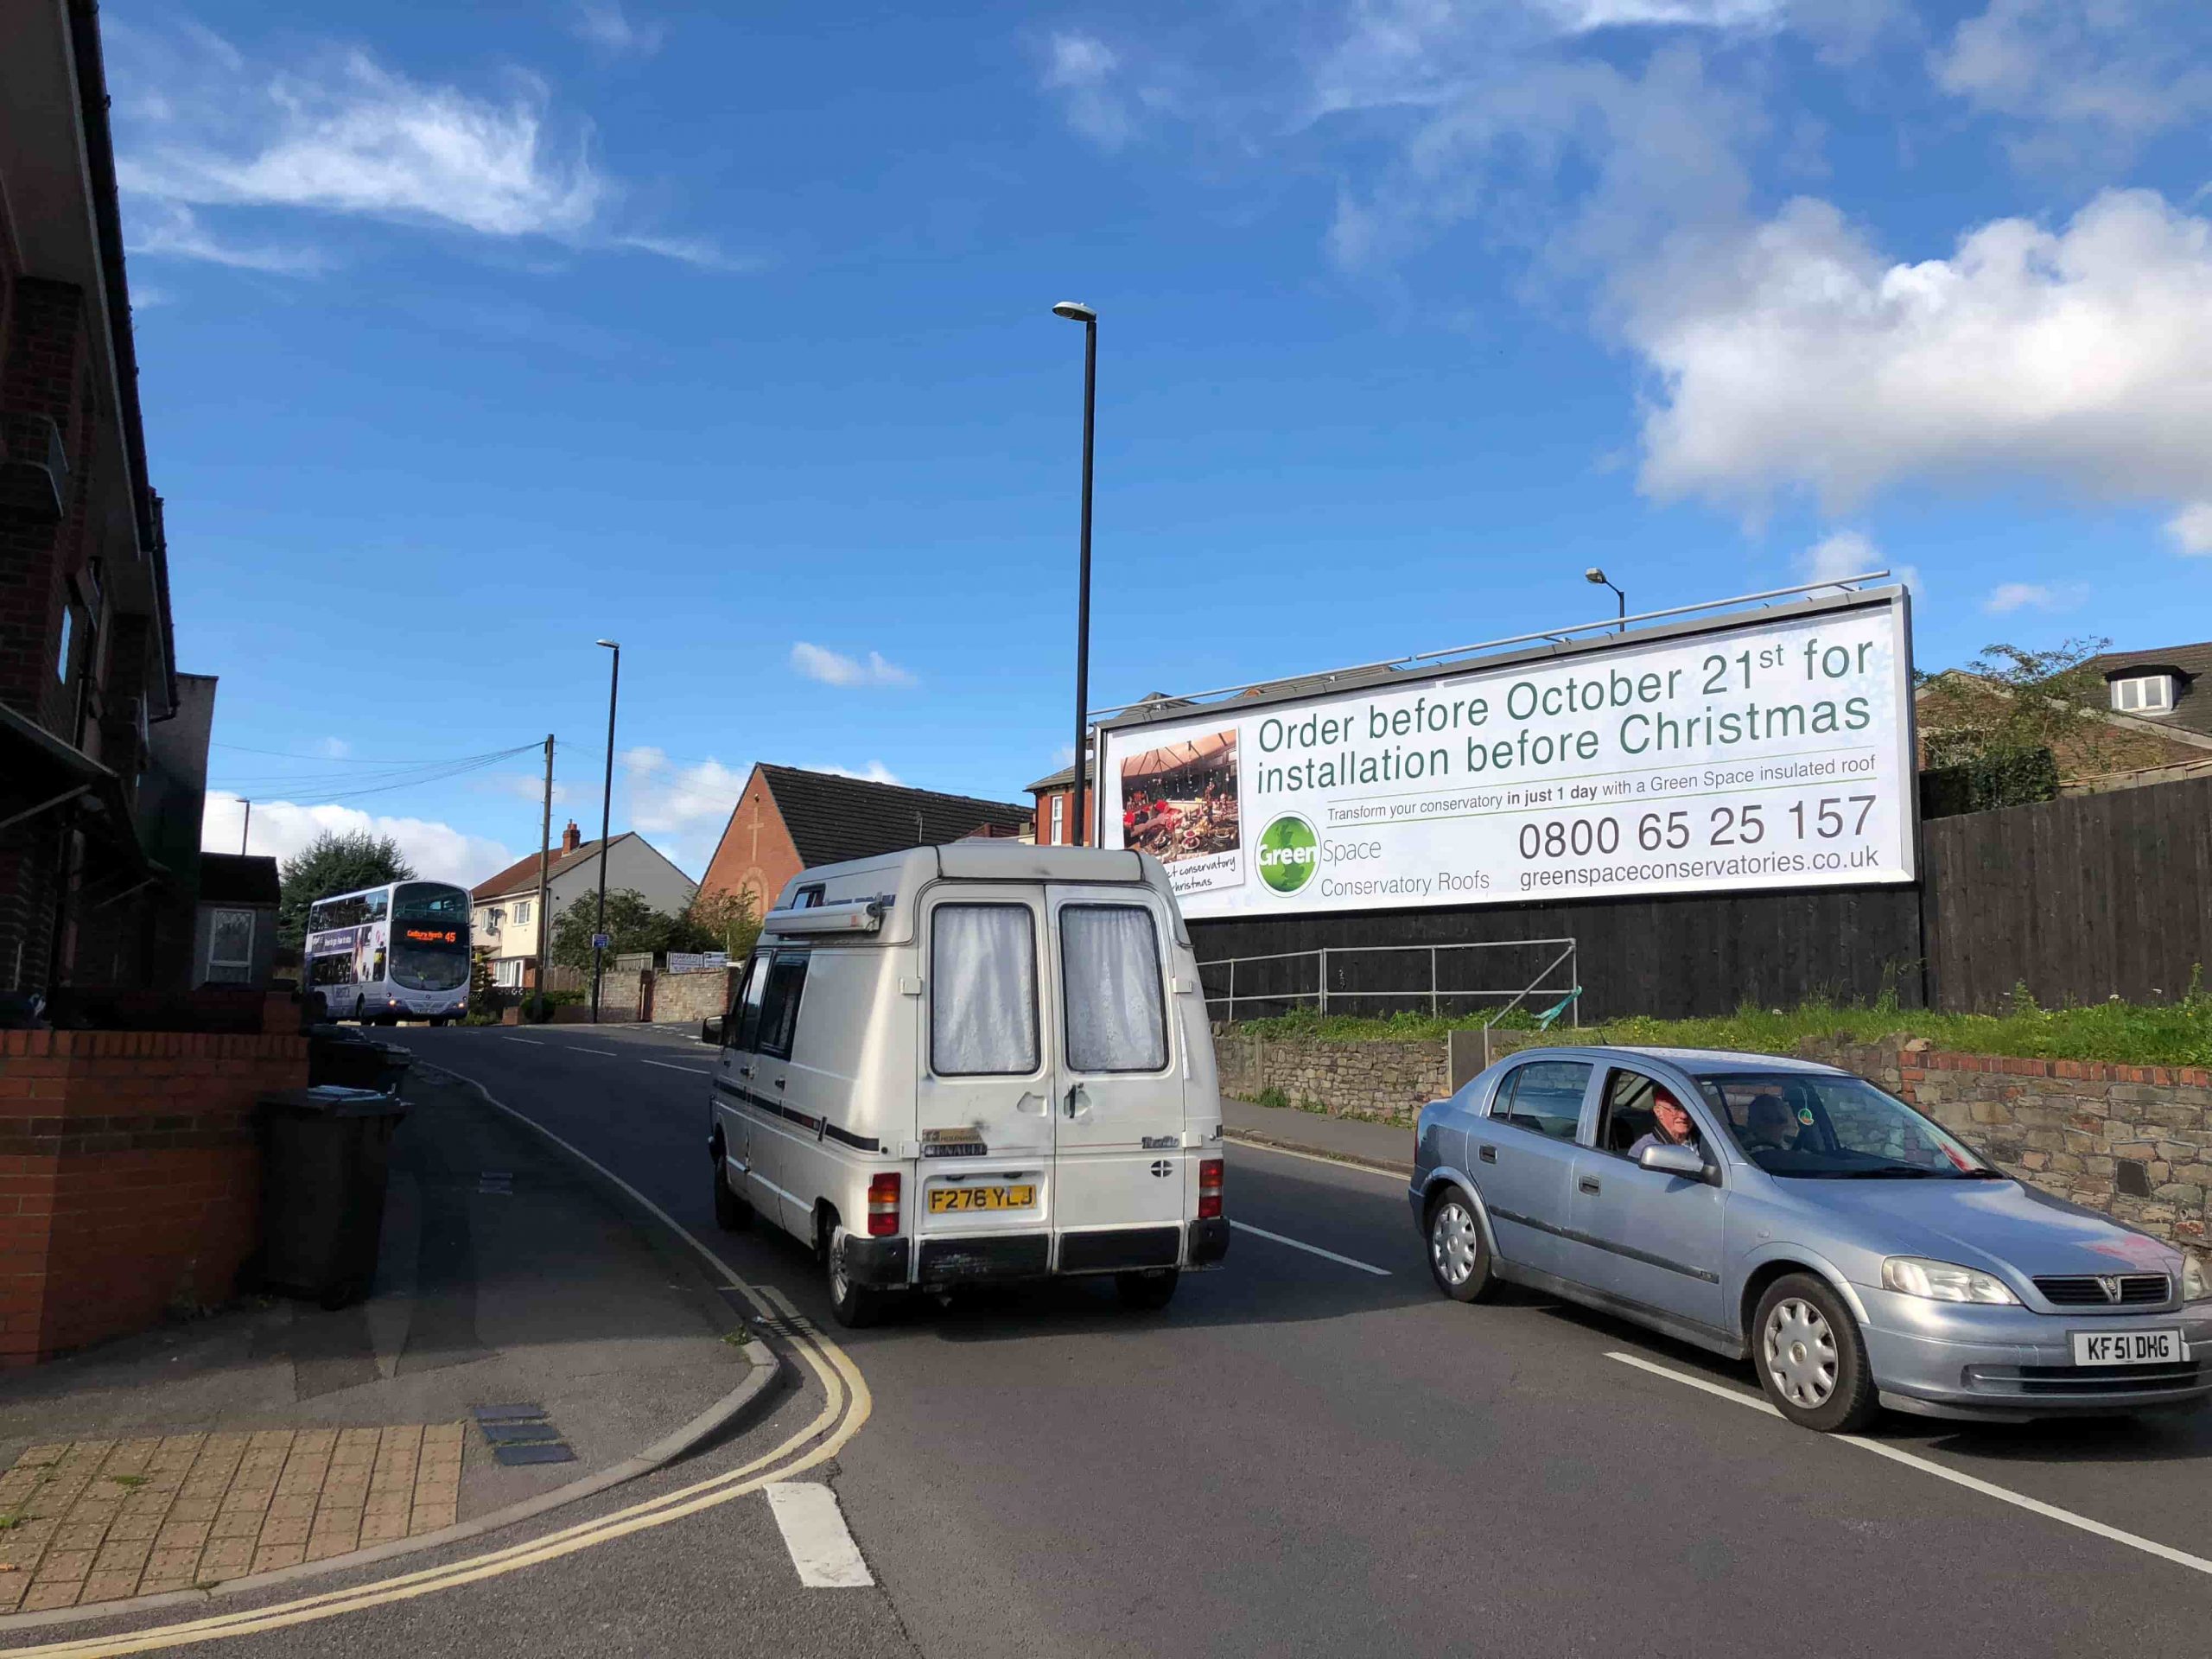 Does outdoor advertising build trust